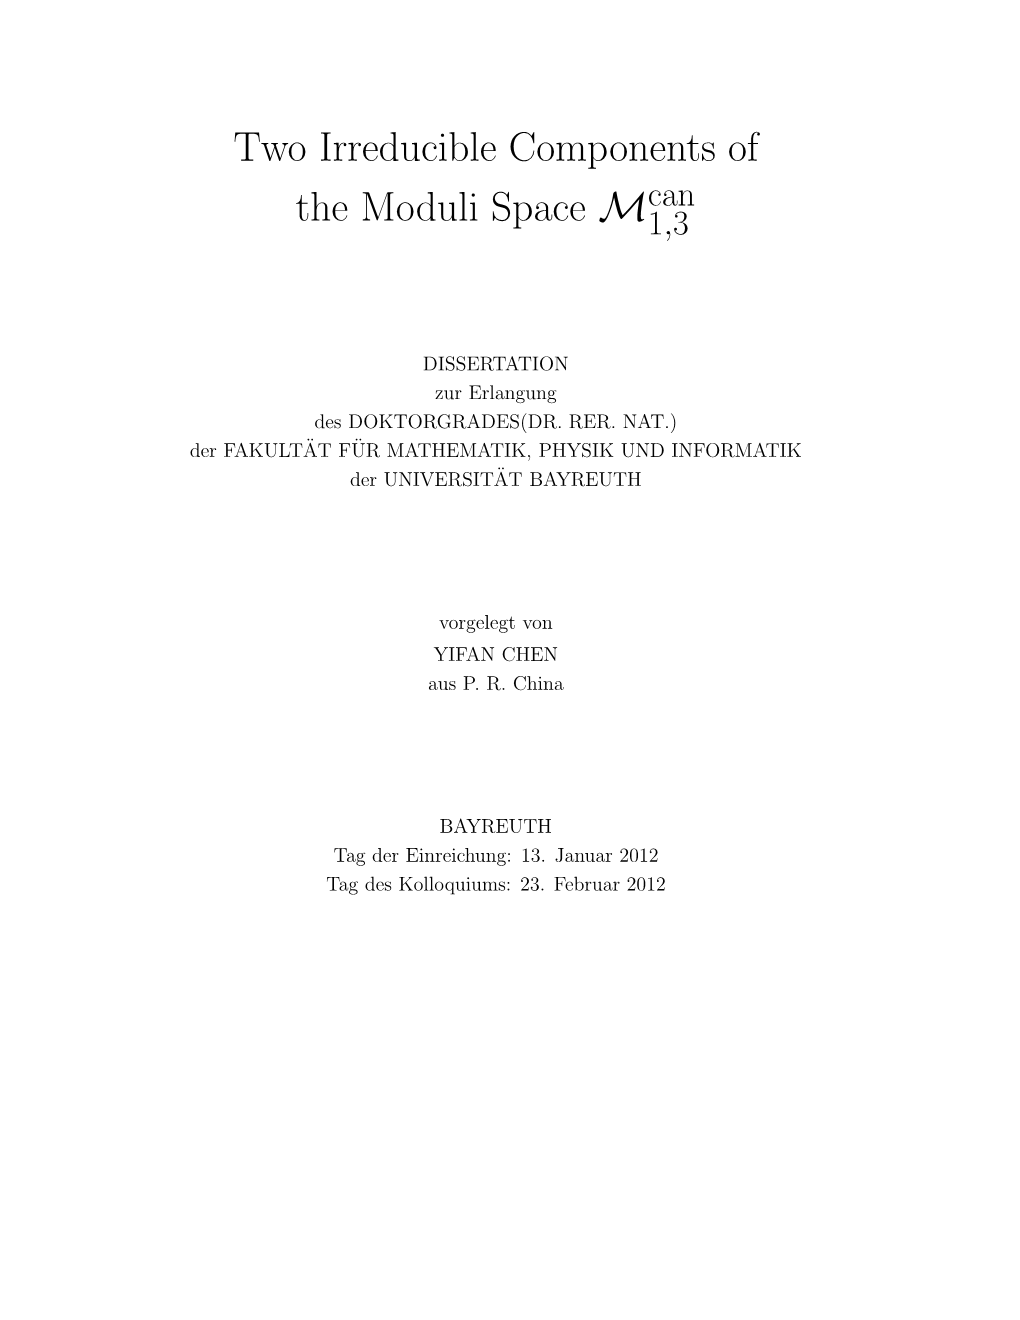 Two Irreducible Components of the Moduli Space M